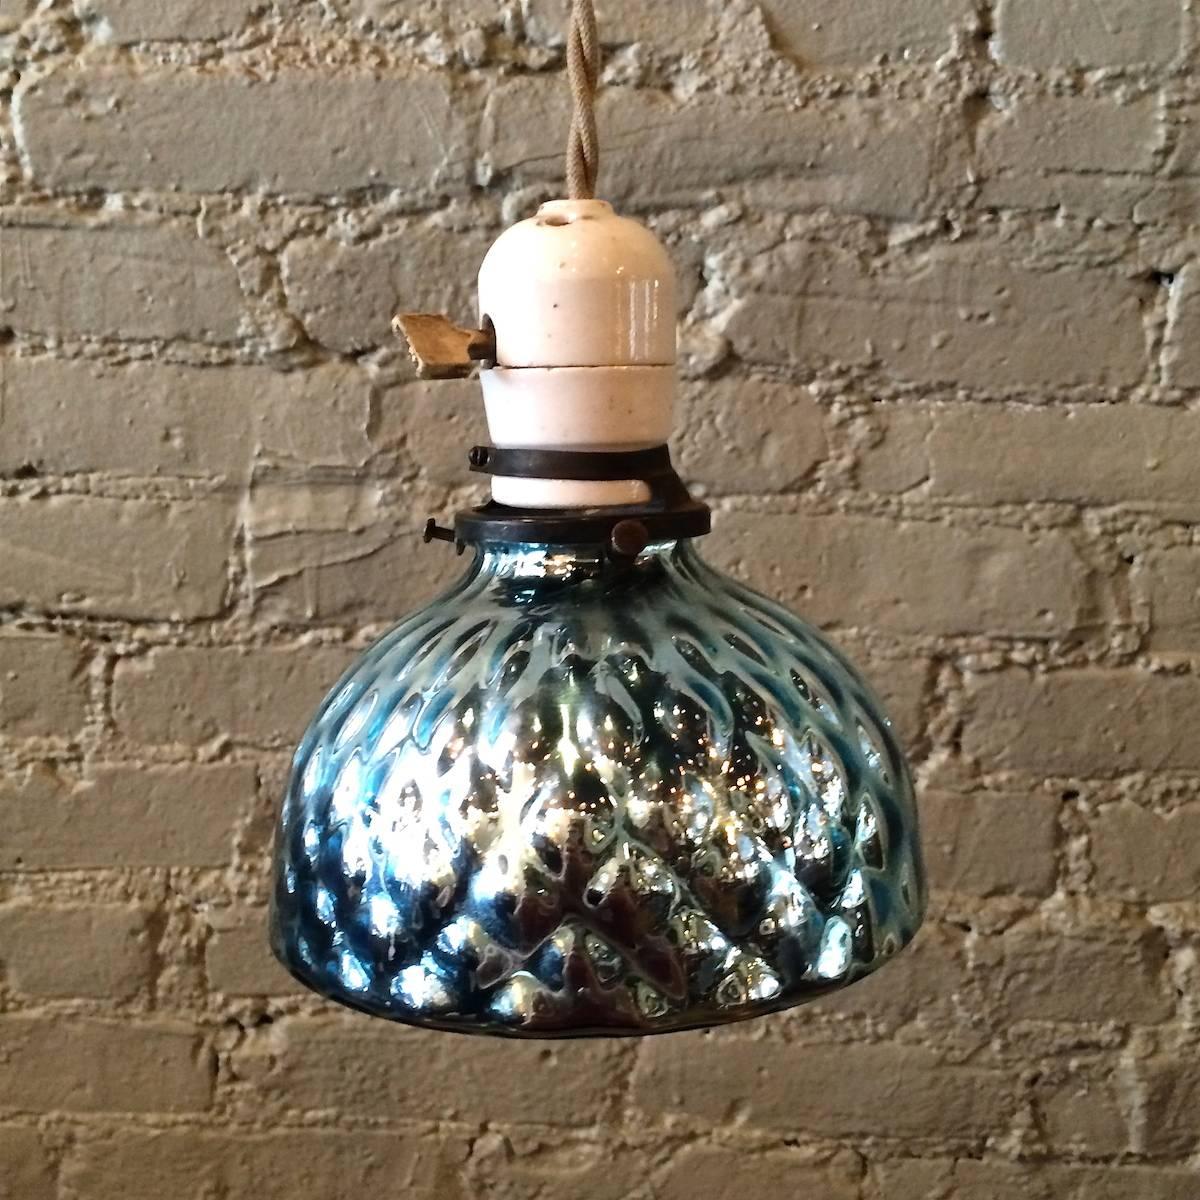 Petite, deep blue quilted mercury glass pendant light with porcelain turnkey fitter is newly wired with braided cord and able to take bulbs up to 200 watts.